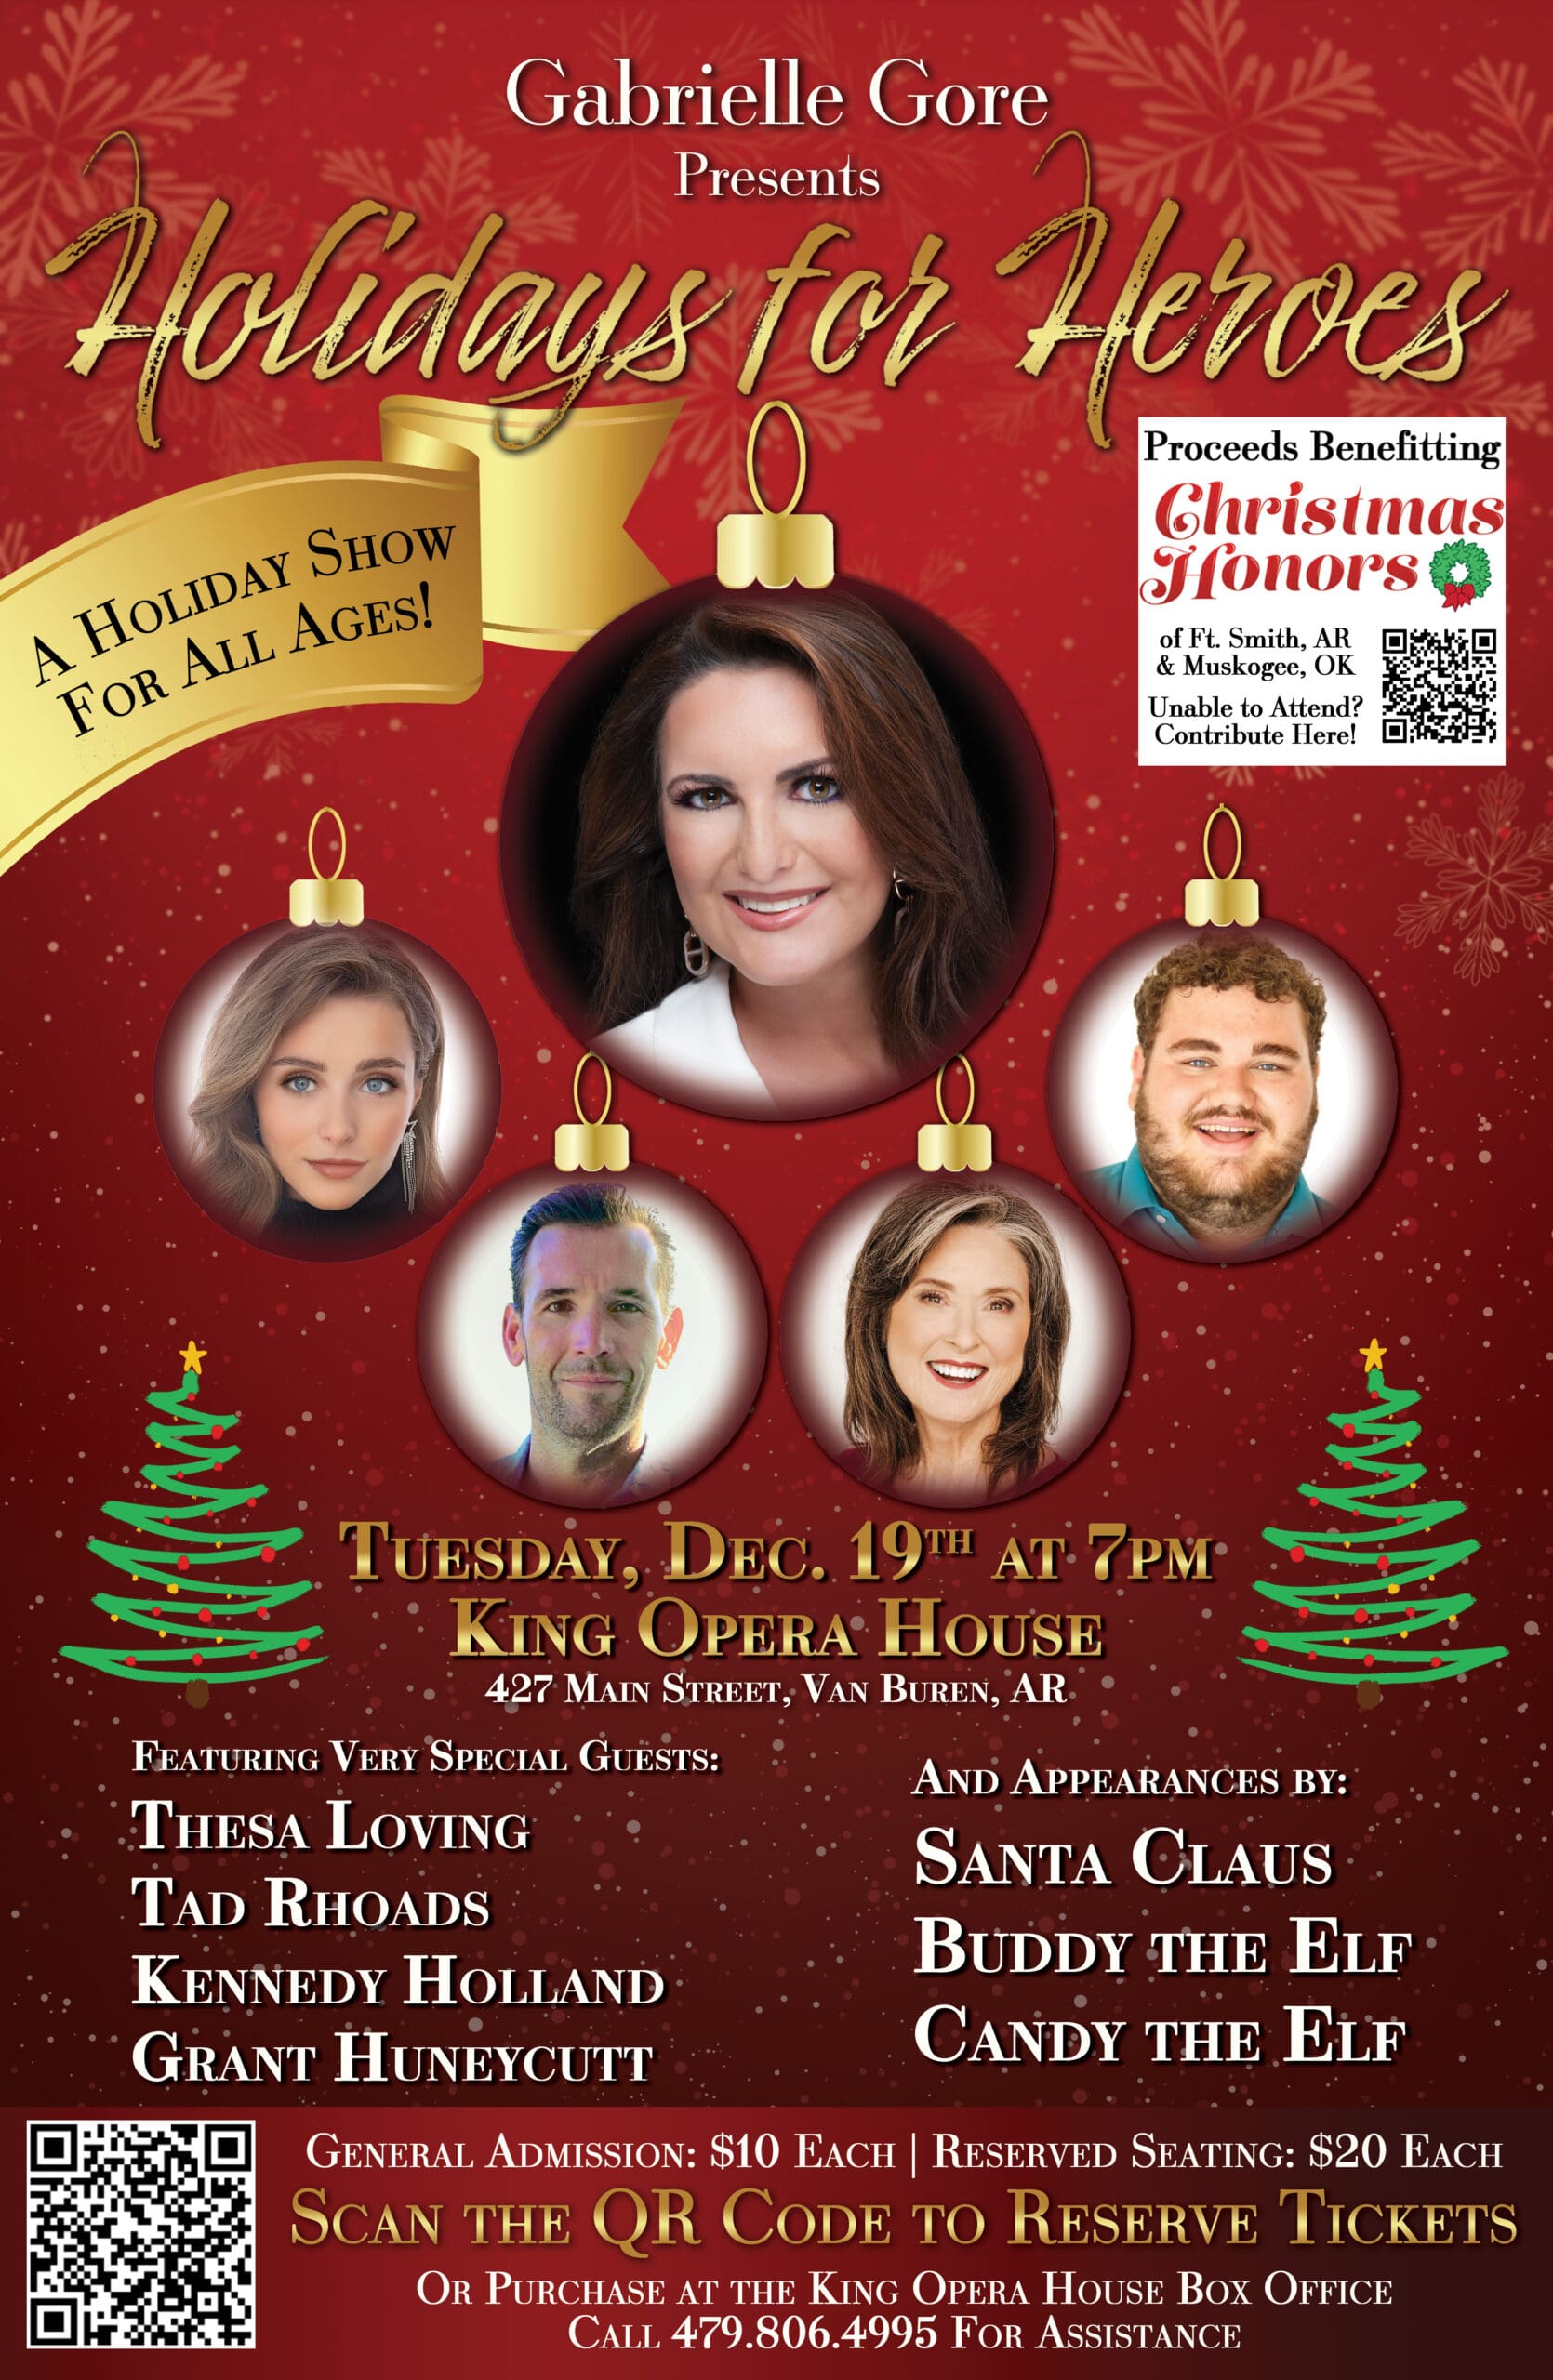 Holidays for Heroes benefiting Christmas Honors